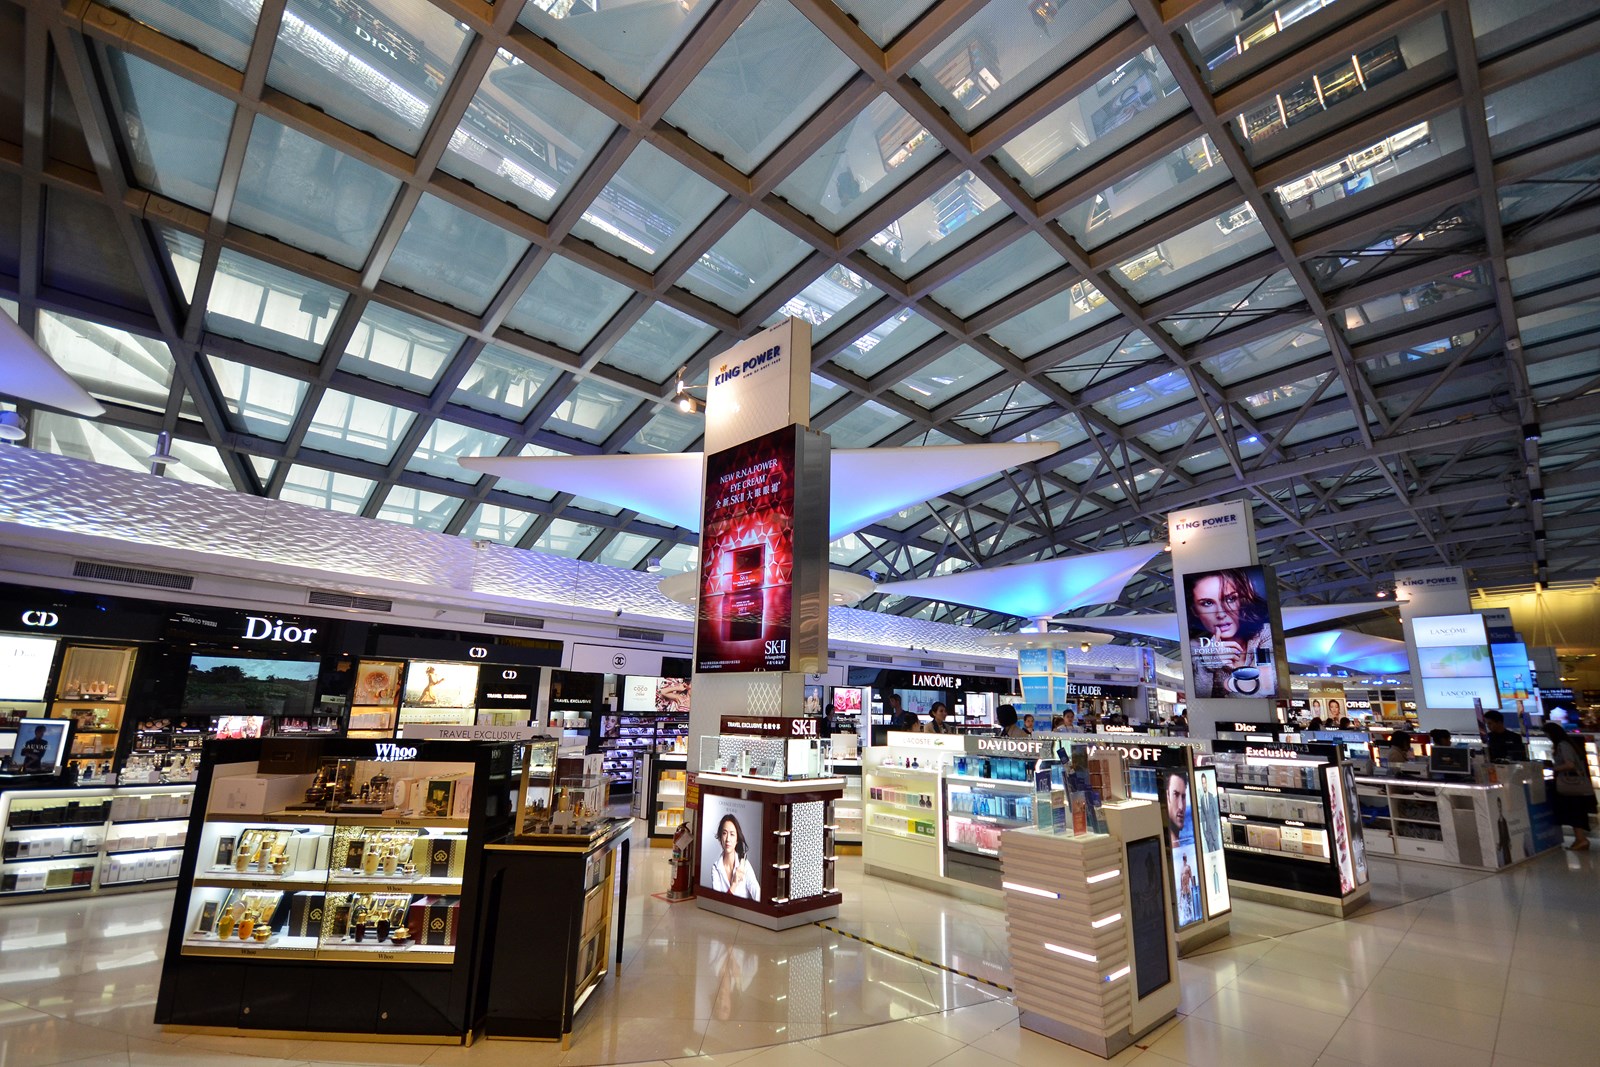 Airport Duty Free Shopping ?anchor=center&mode=crop&width=1600&height=1067&format=auto&quality=90&rnd=133161130178700000